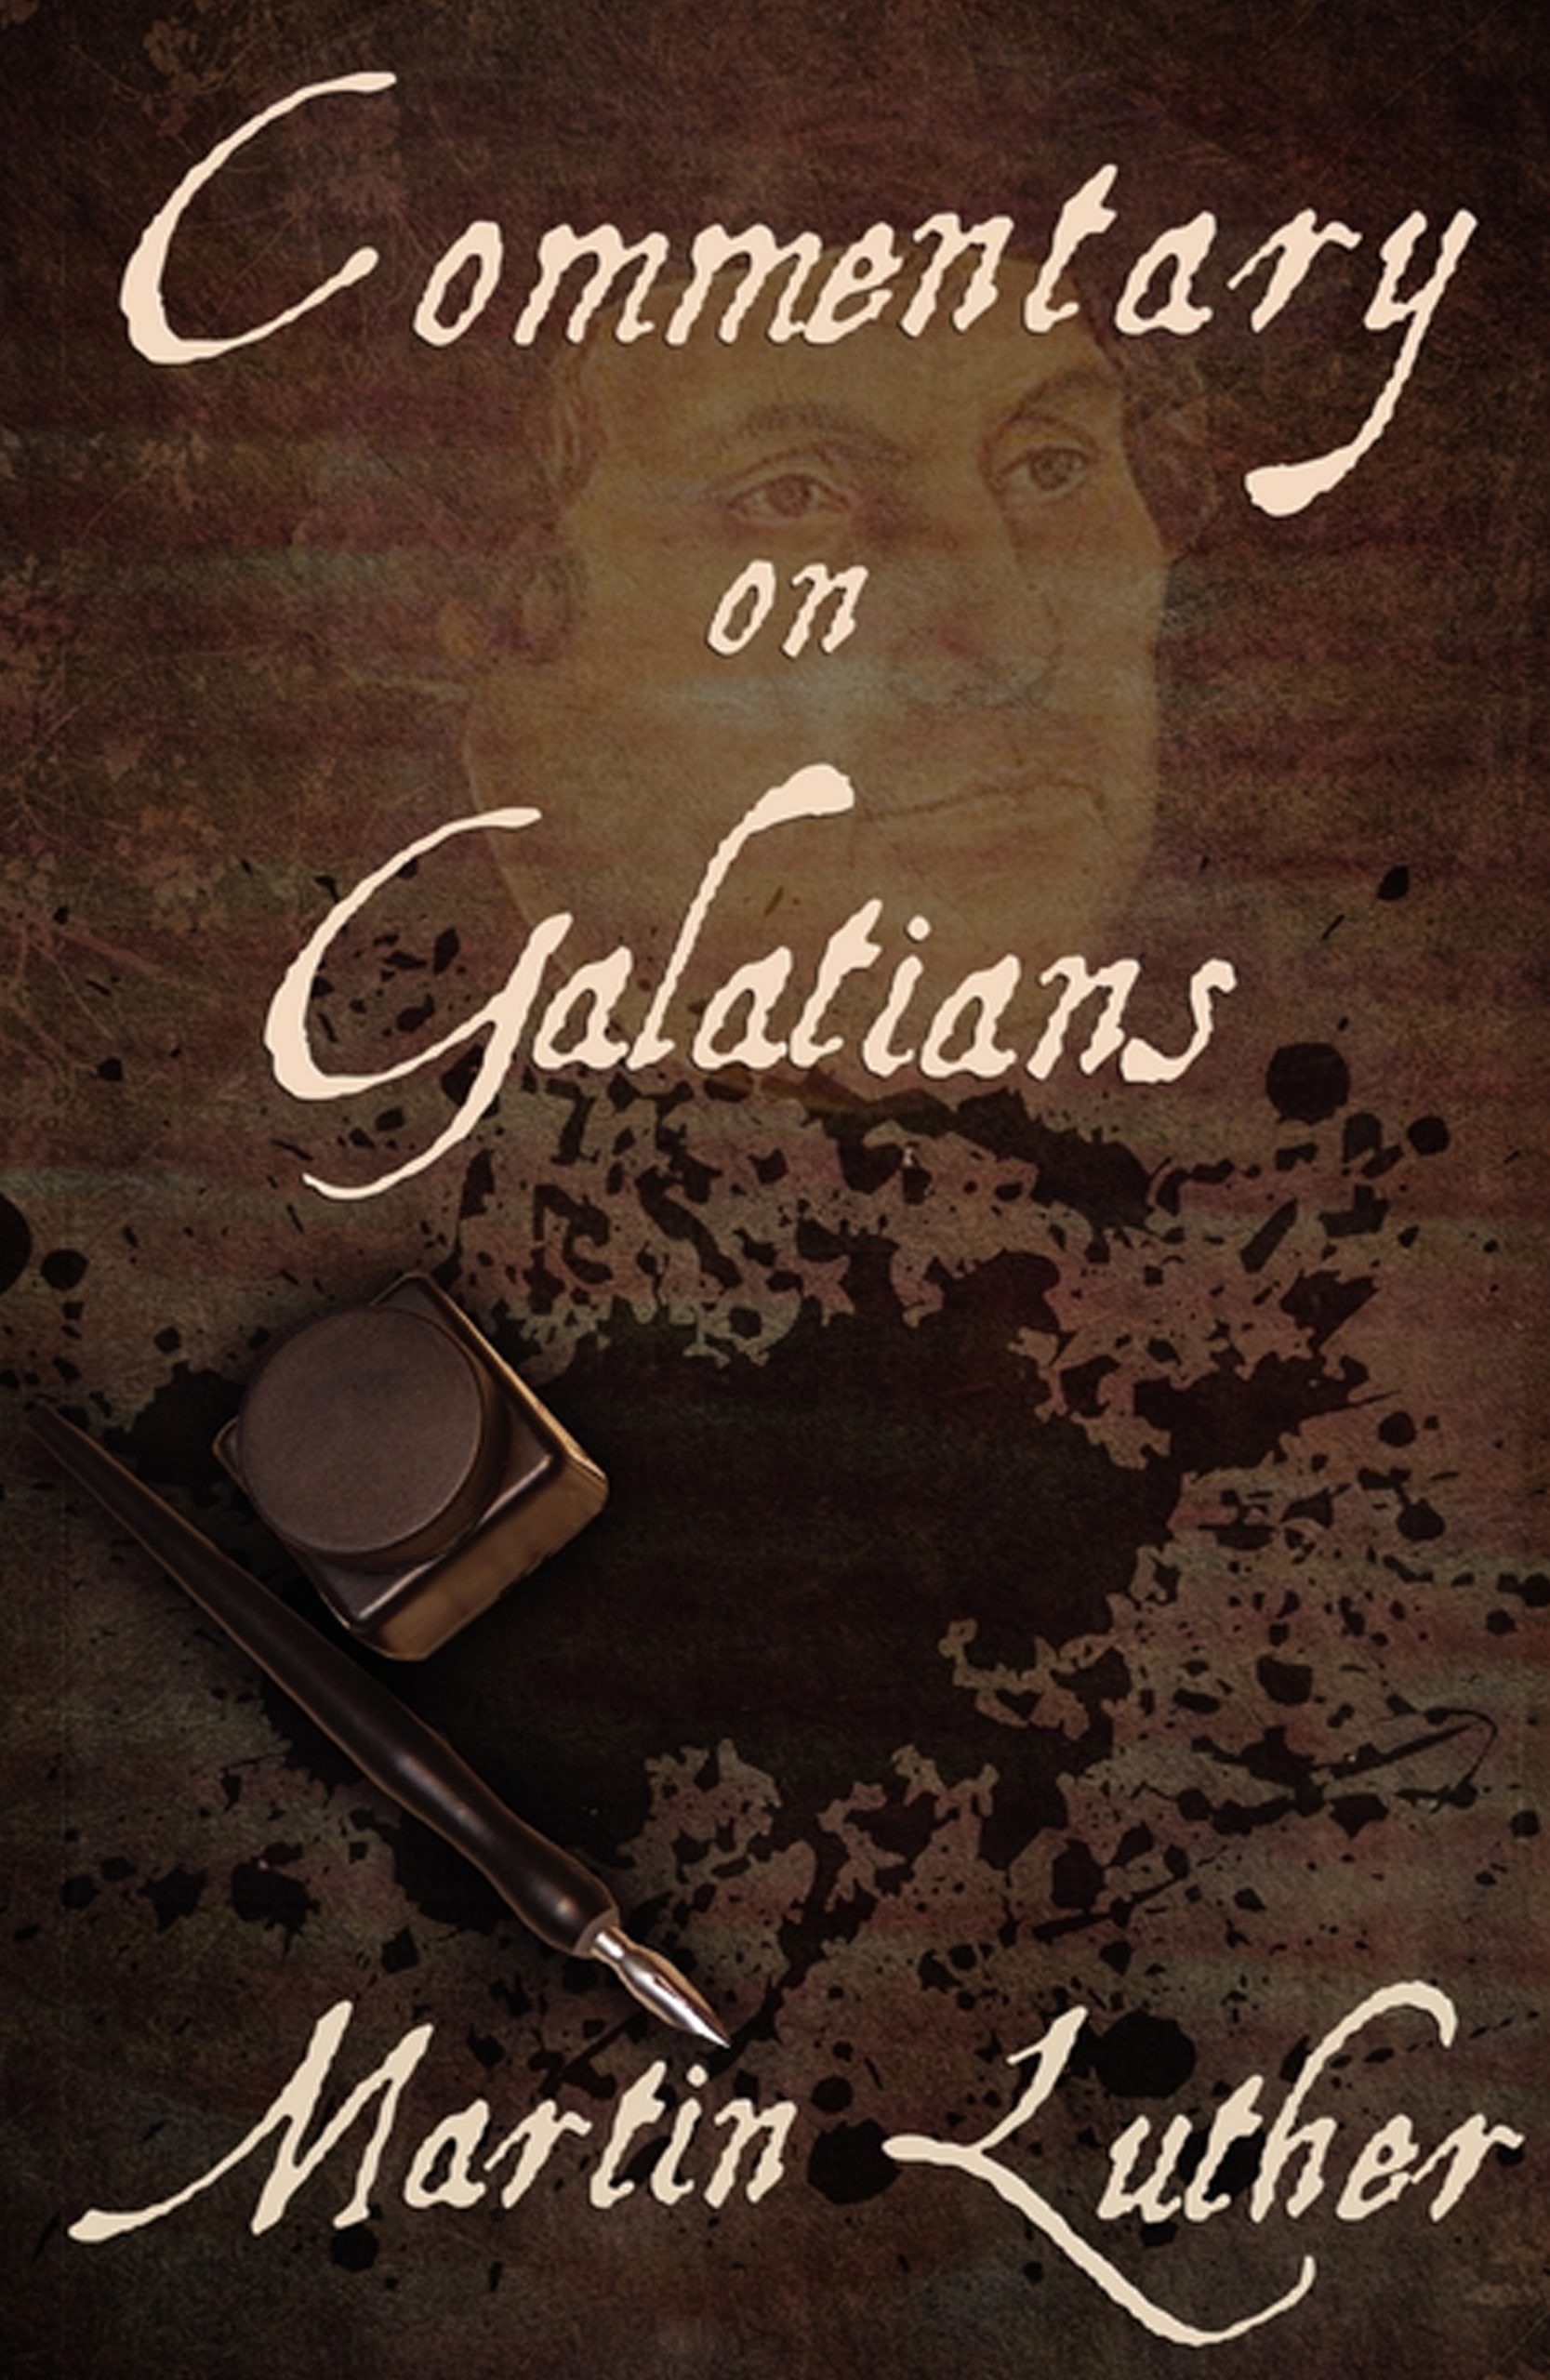 Commentary-on-Galatians-cover